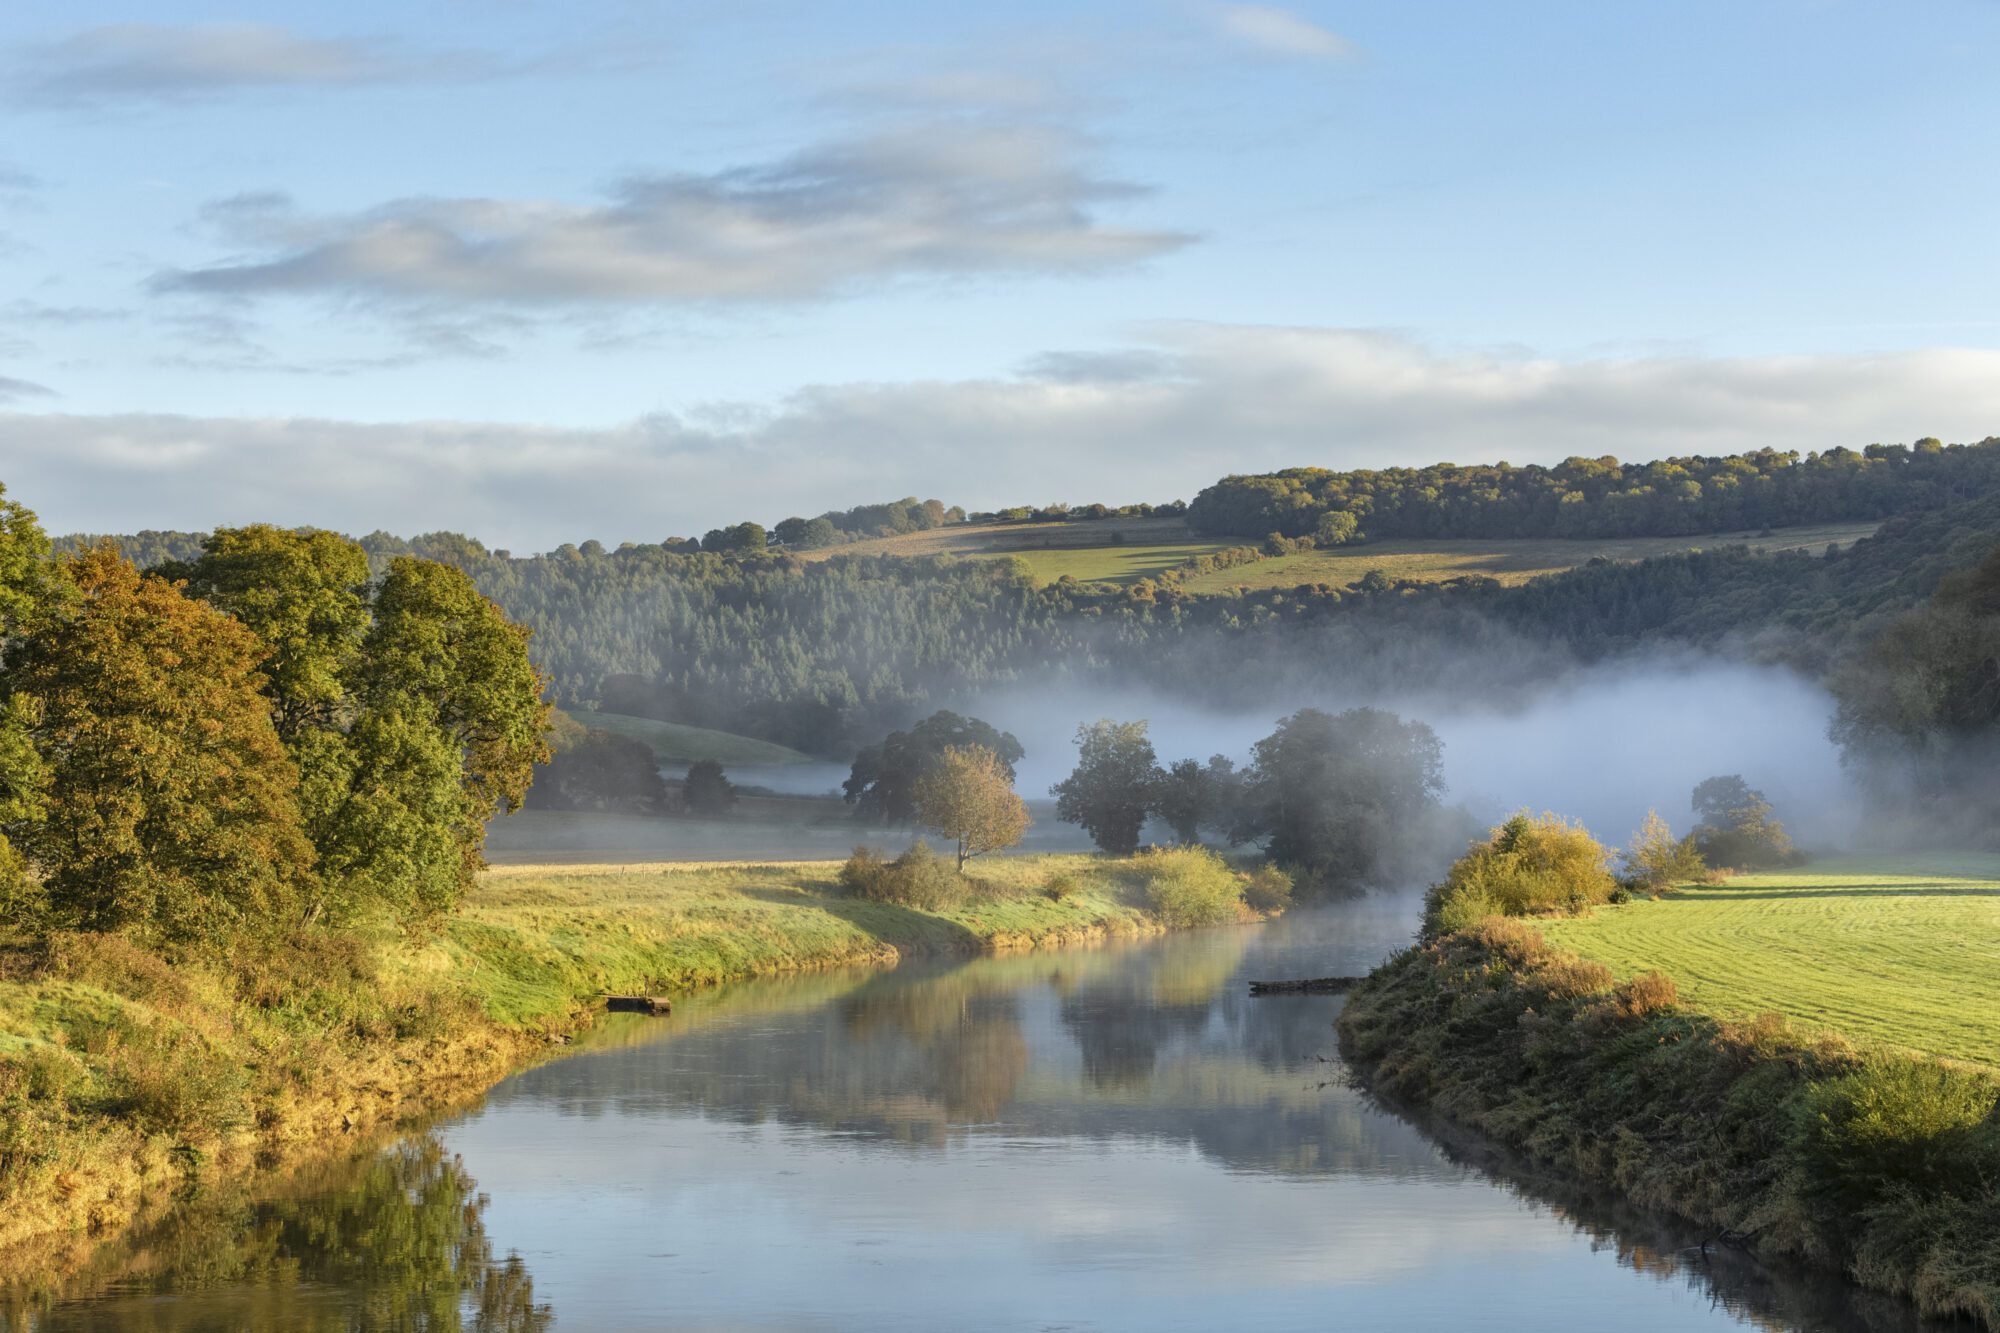 A landscape of the river wye, with green and tyellow pasture and trees stretching into the distance. In the foreground a wide river, which melts back into a misty glade among trees and a cloud-spotted pale blue sky